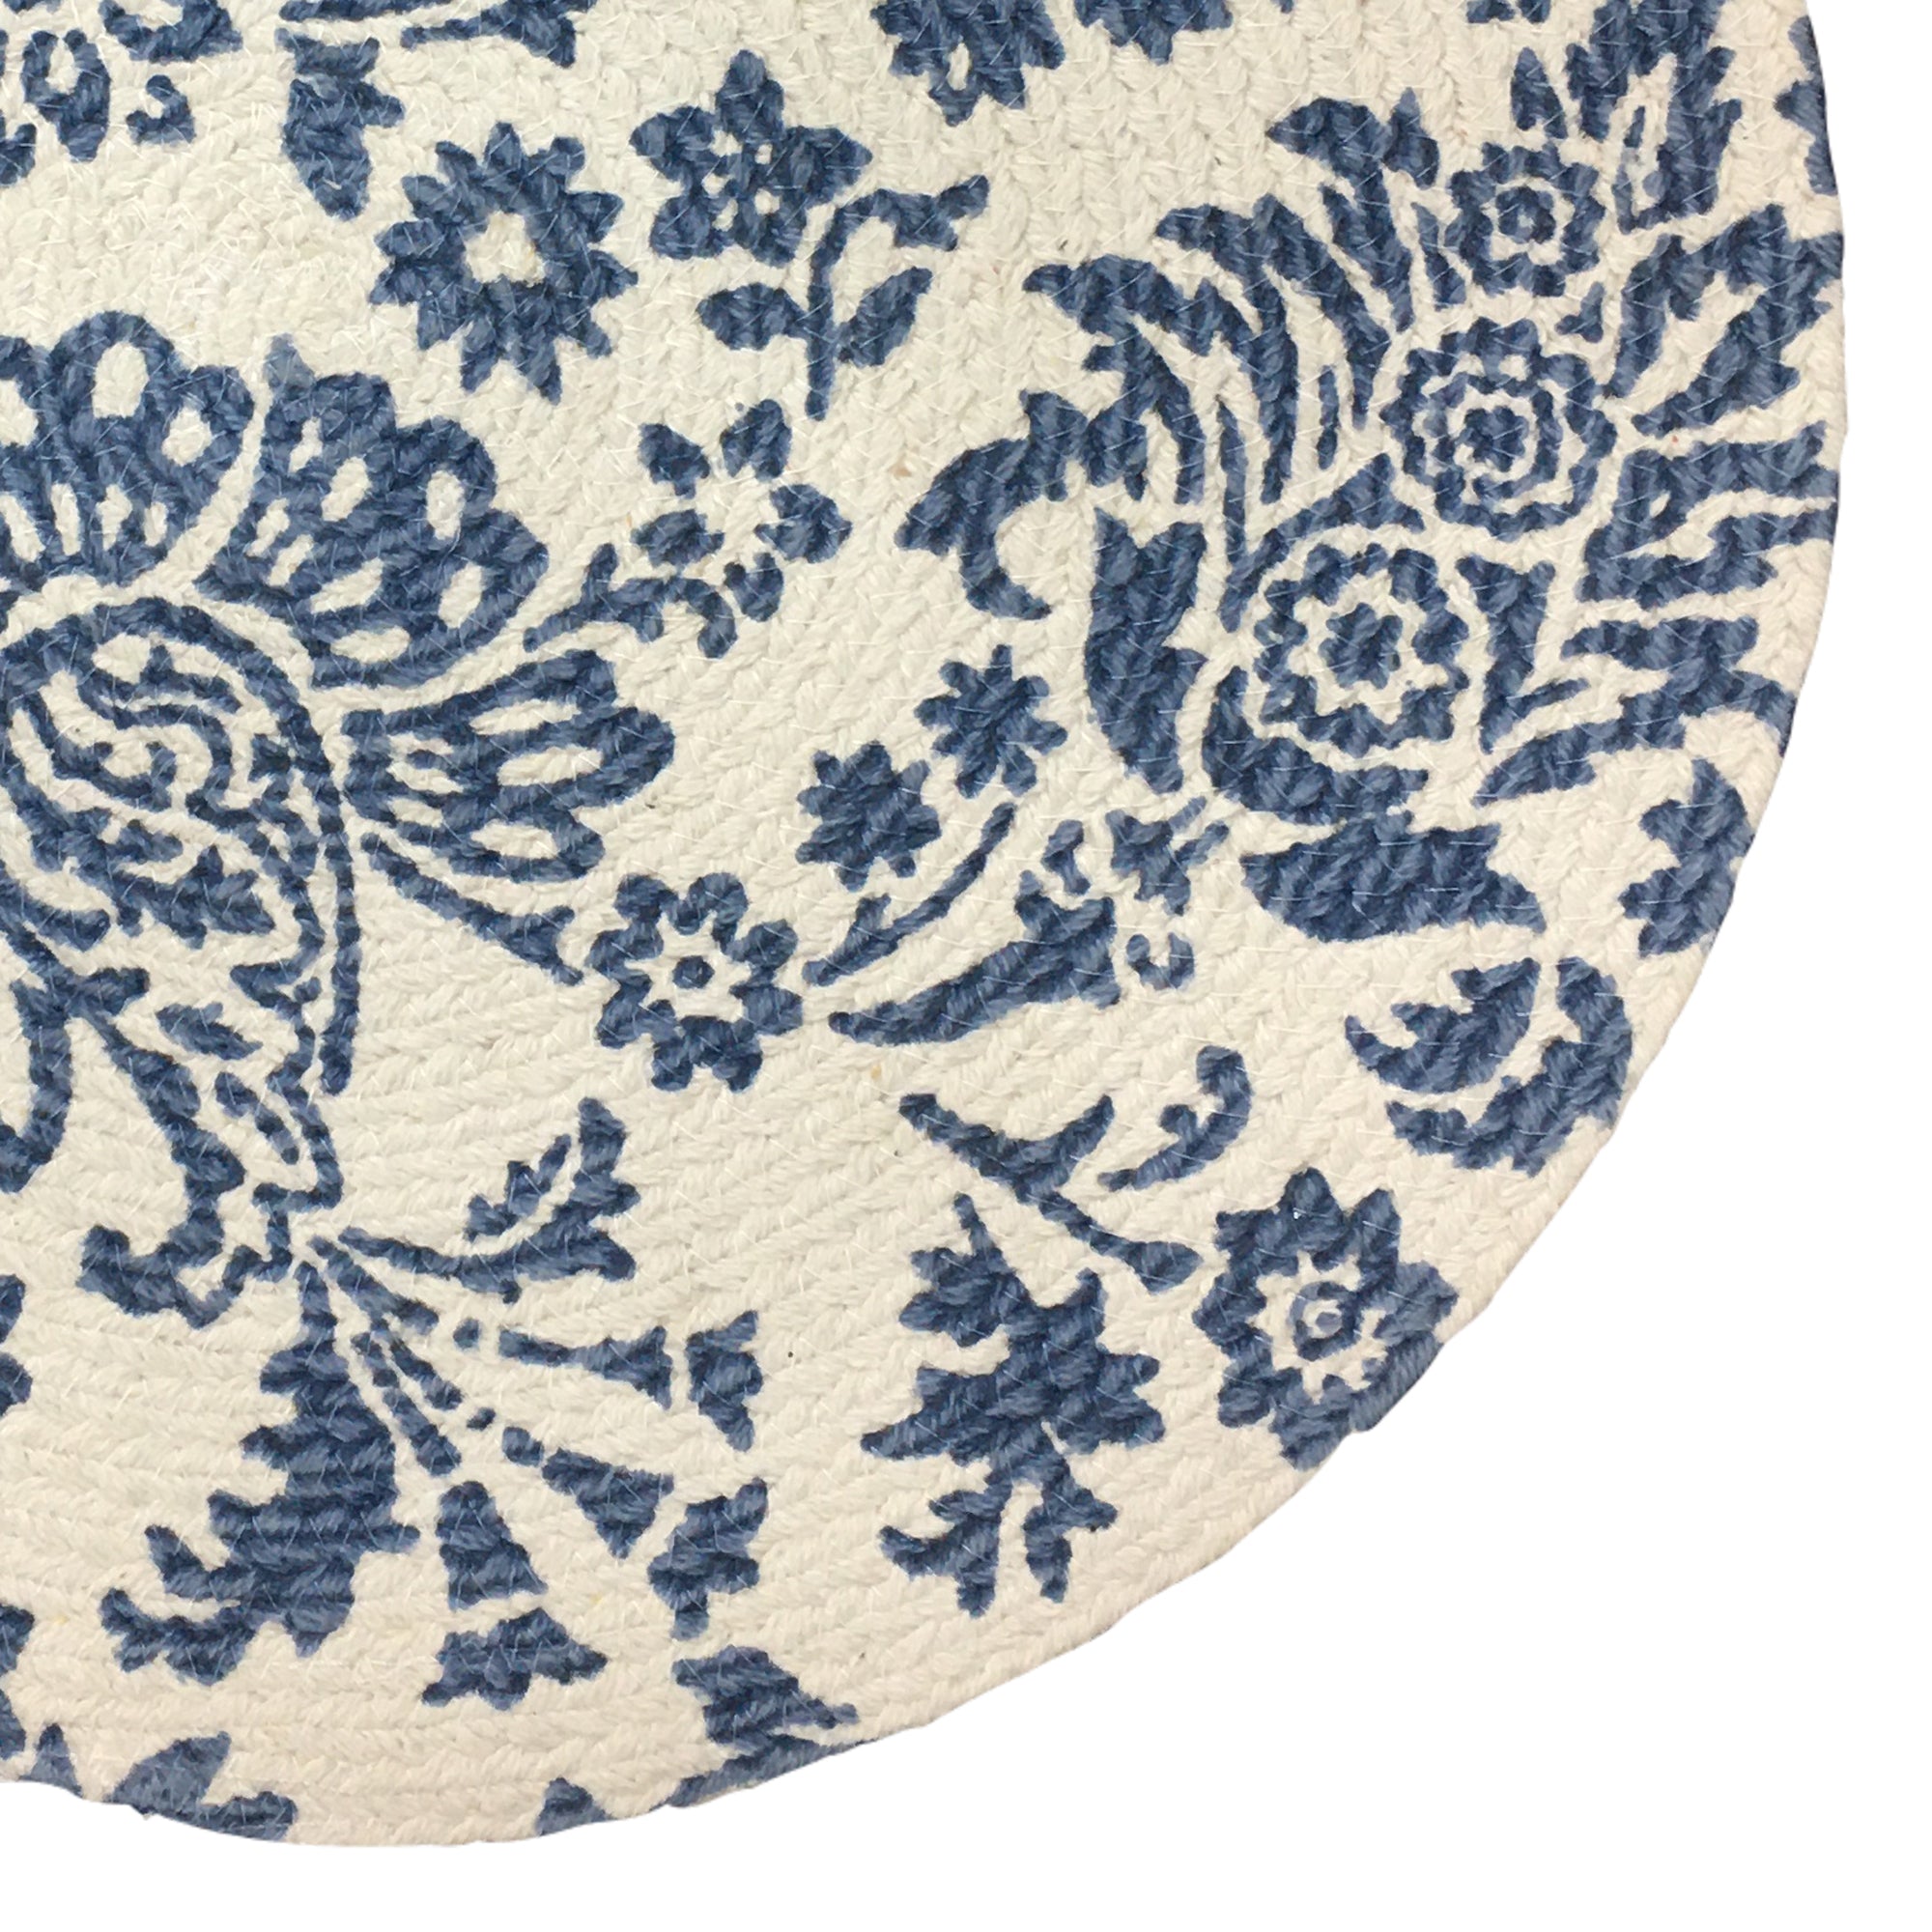 Jute Placemats, Chargers / Set of 2 / 15 in. Round/ White & Blue